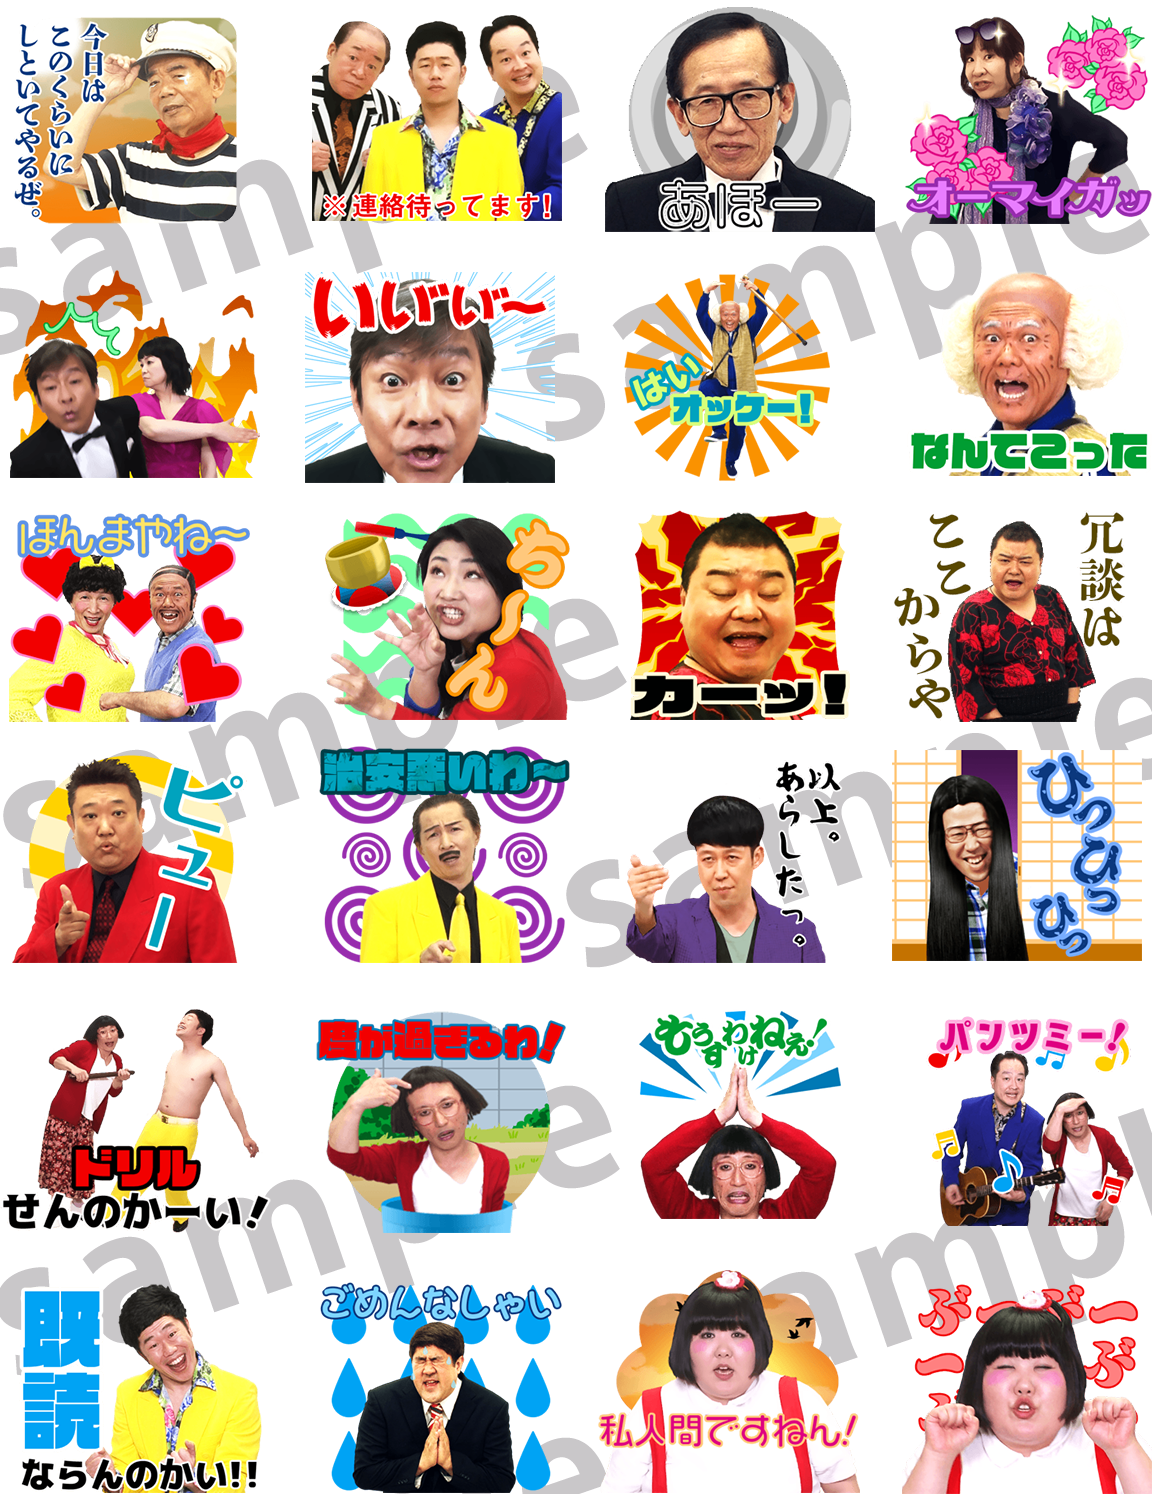 http://news.yoshimoto.co.jp/20171221132503-e104a16061ea497eb68cd4390d76fe001be69e0c.png